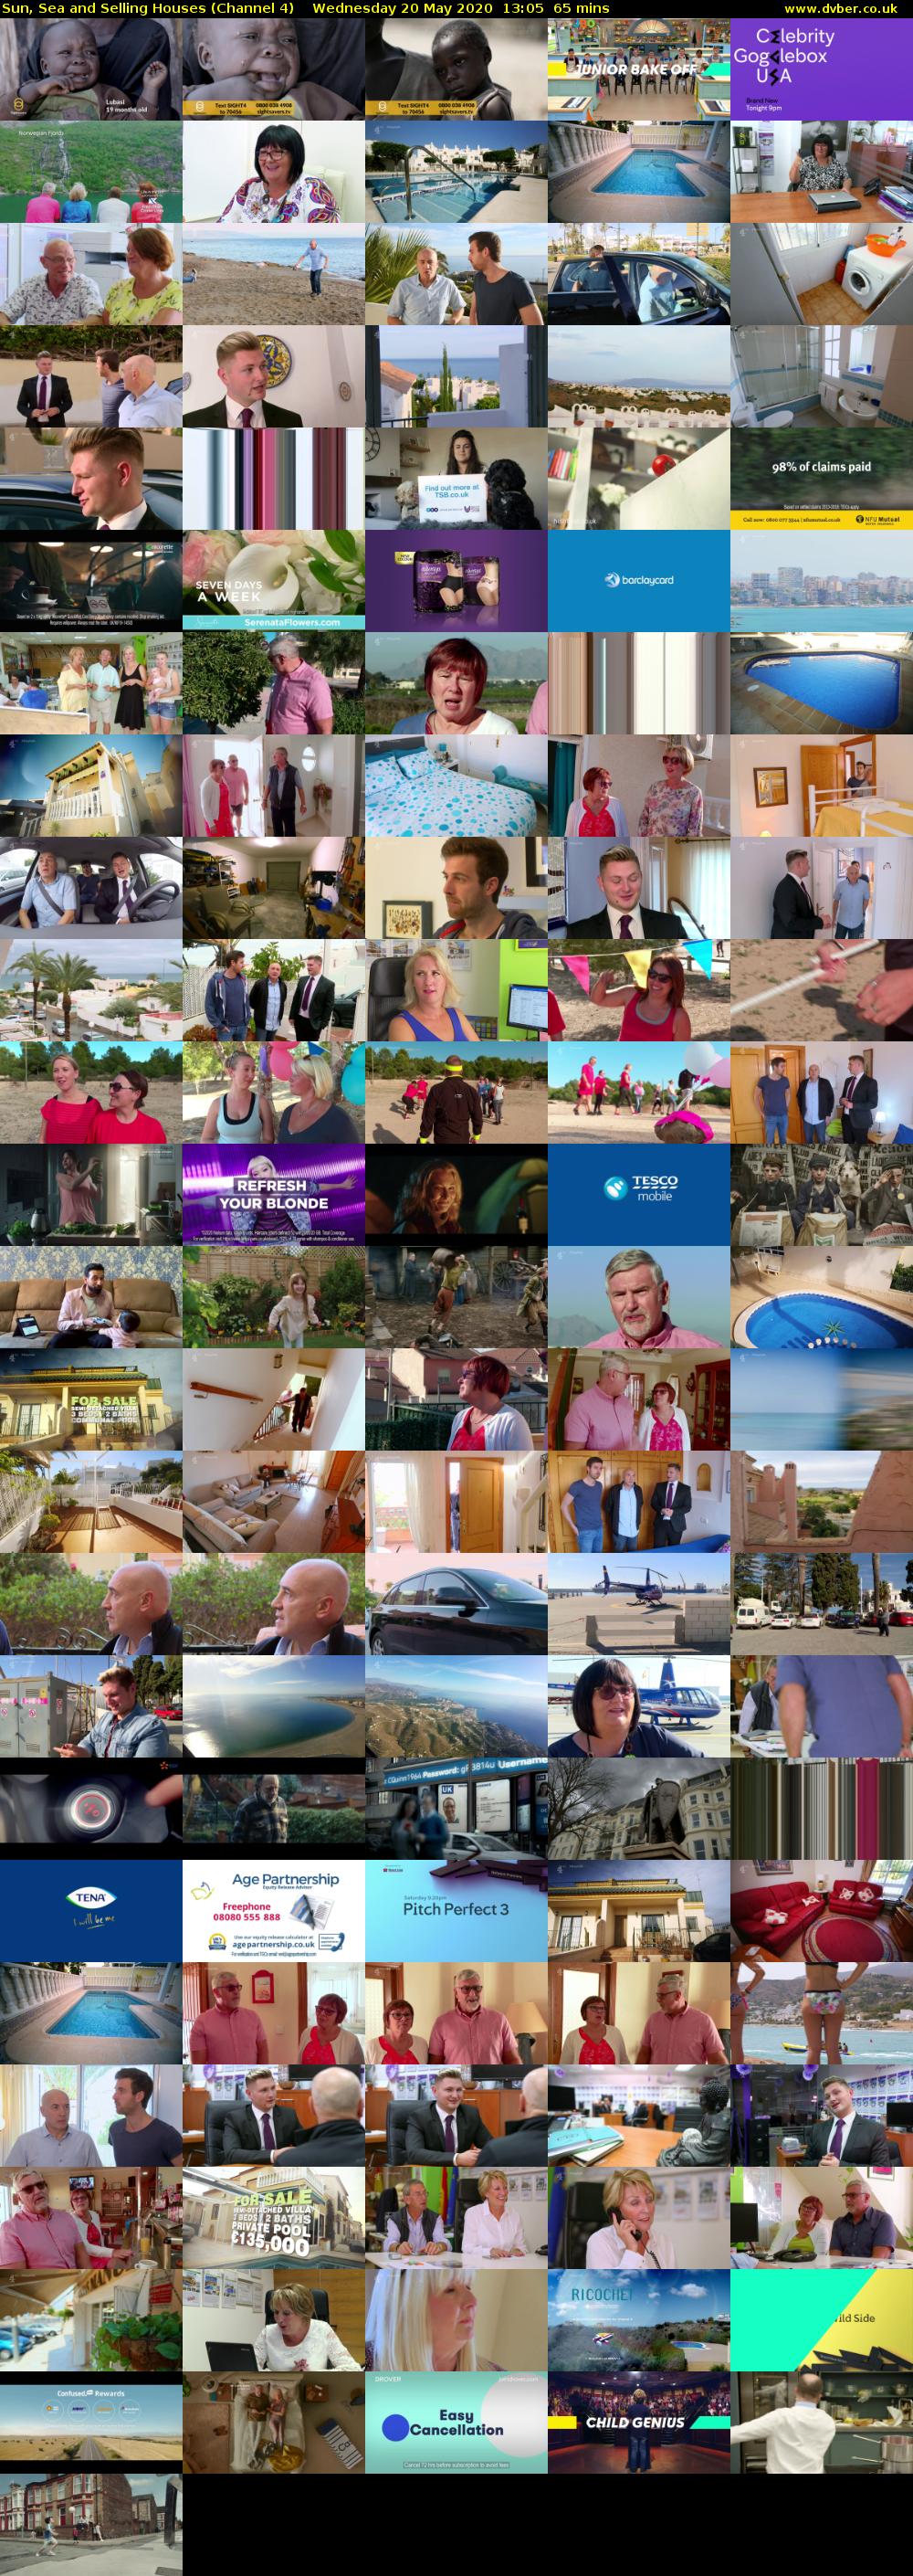 Sun, Sea and Selling Houses (Channel 4) Wednesday 20 May 2020 13:05 - 14:10